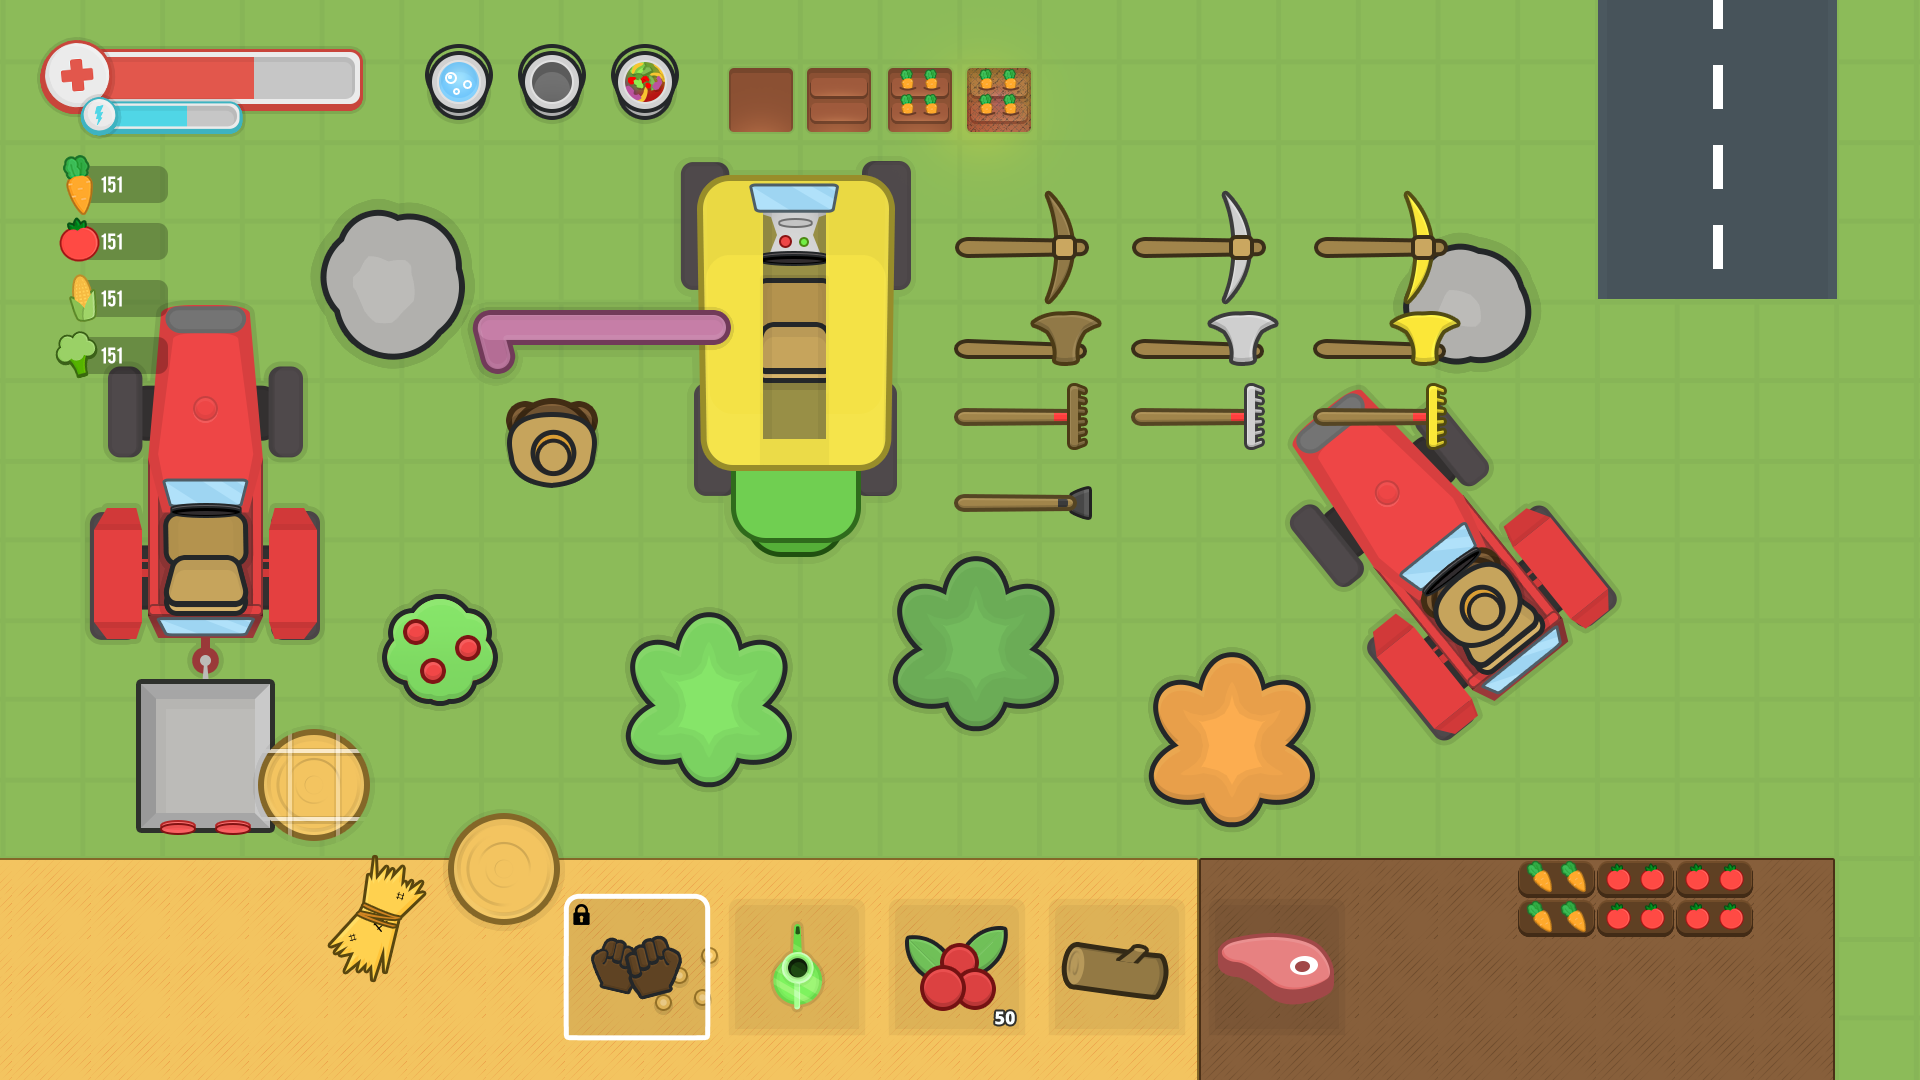 2d game screen of FarmRage game